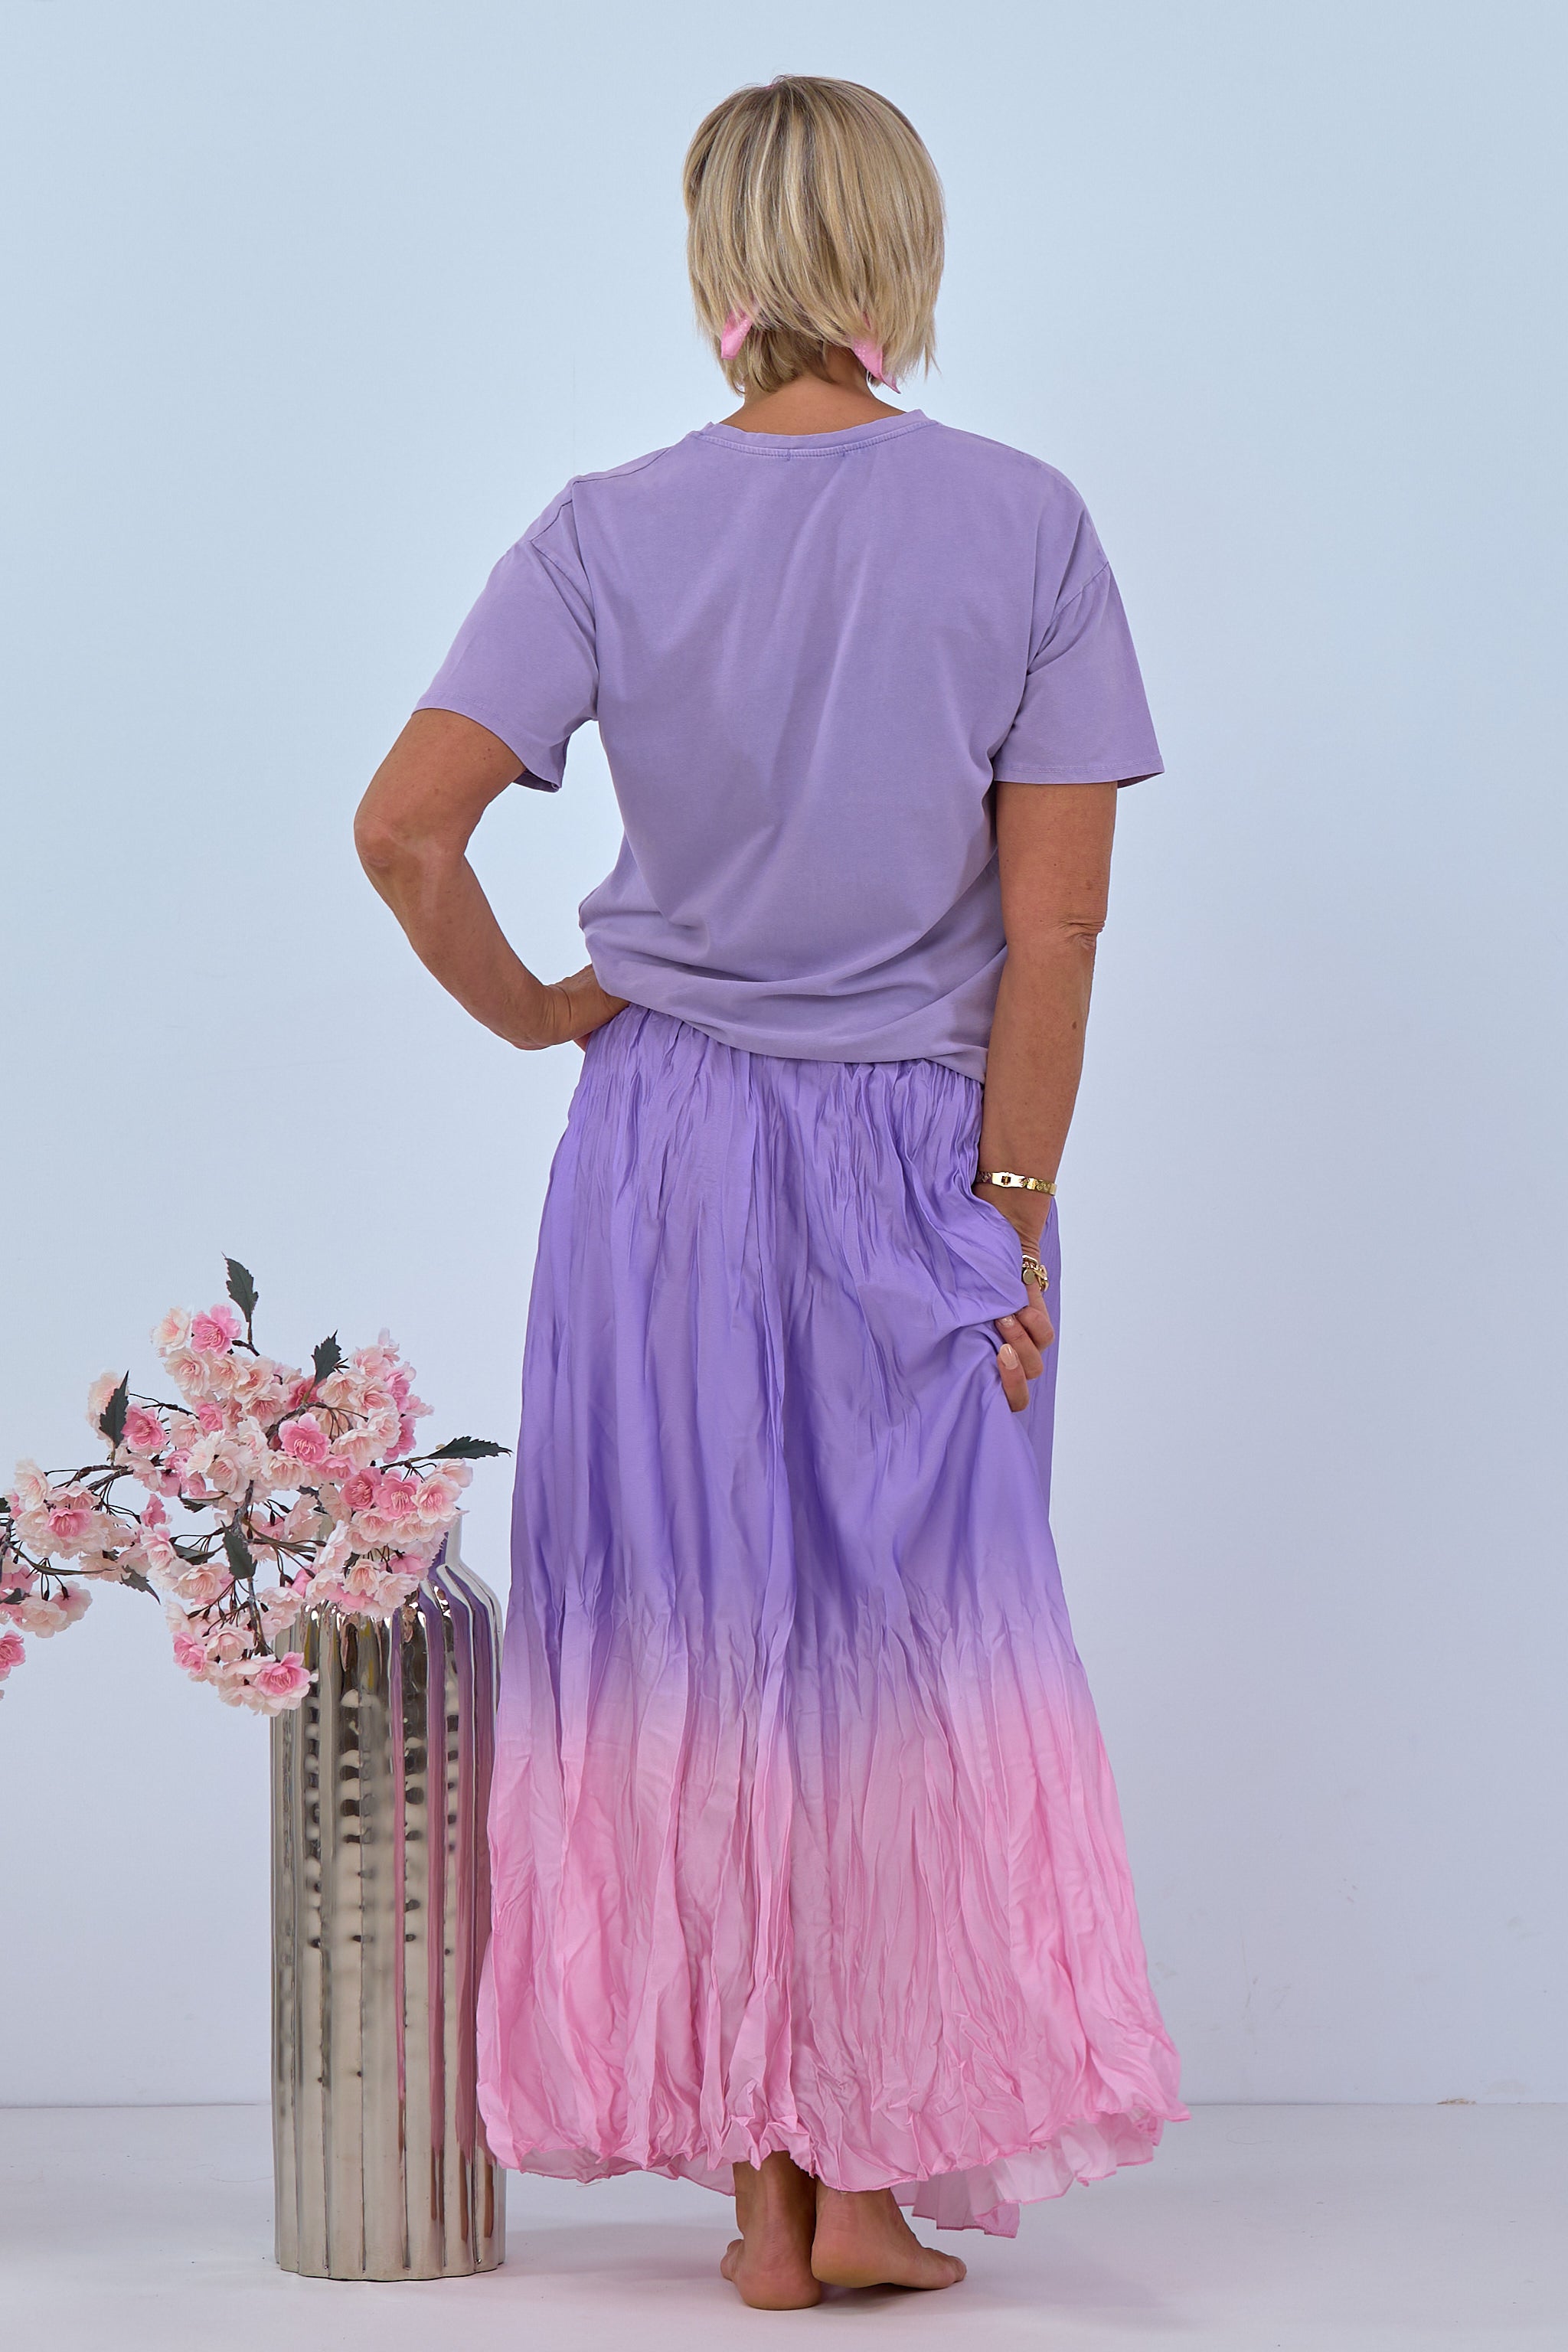 Bicolor skirt with a crinkled look, purple-light pink